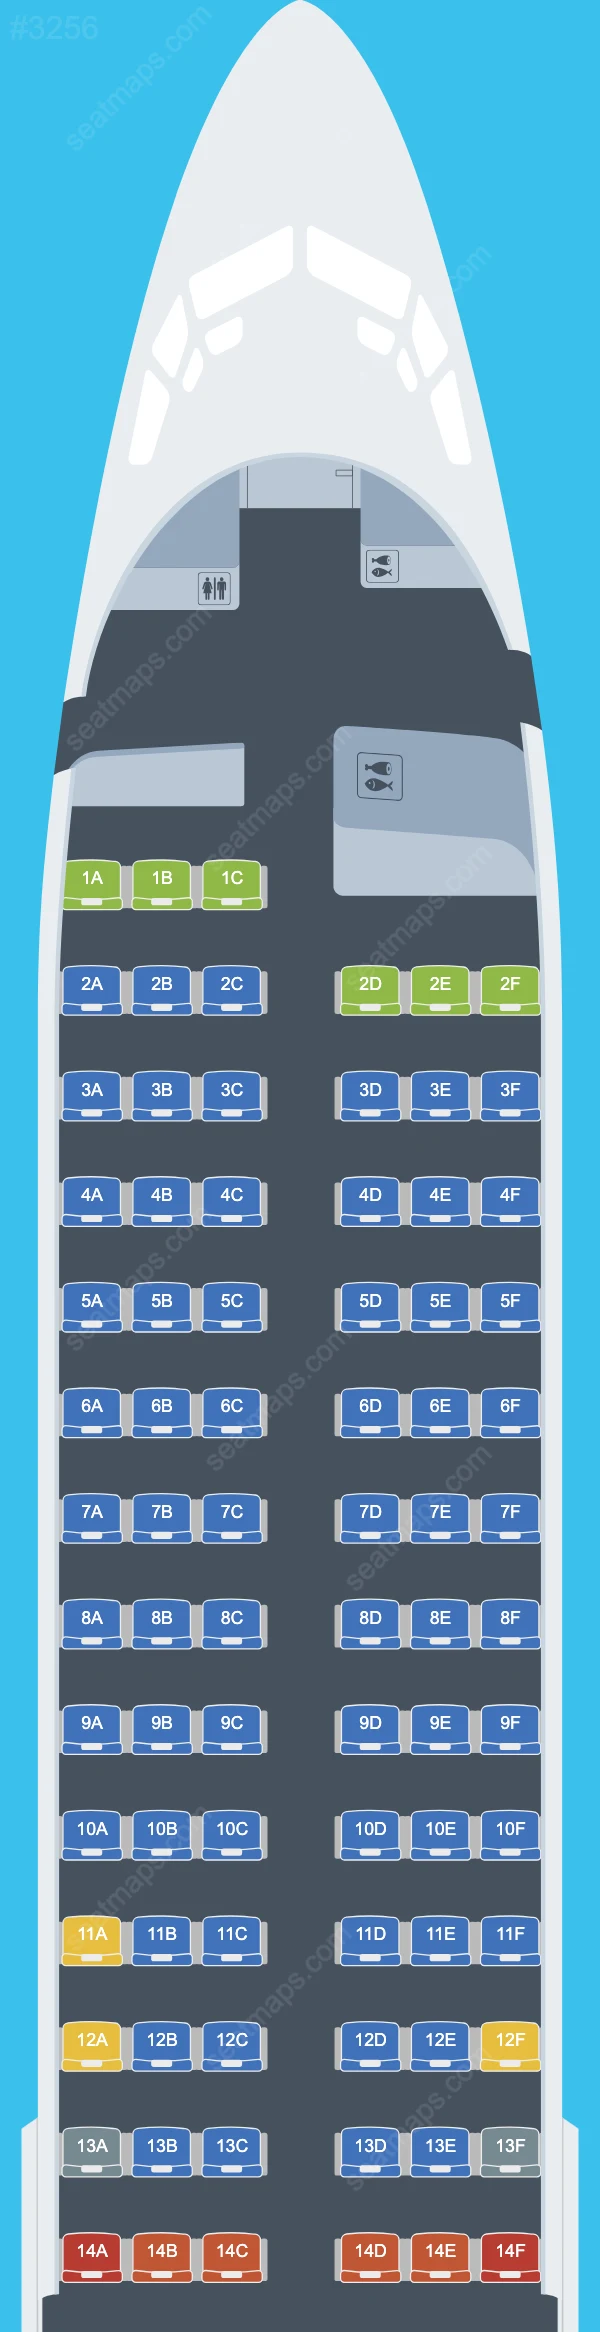 Smartwings Boeing 737 Seat Maps 737-800